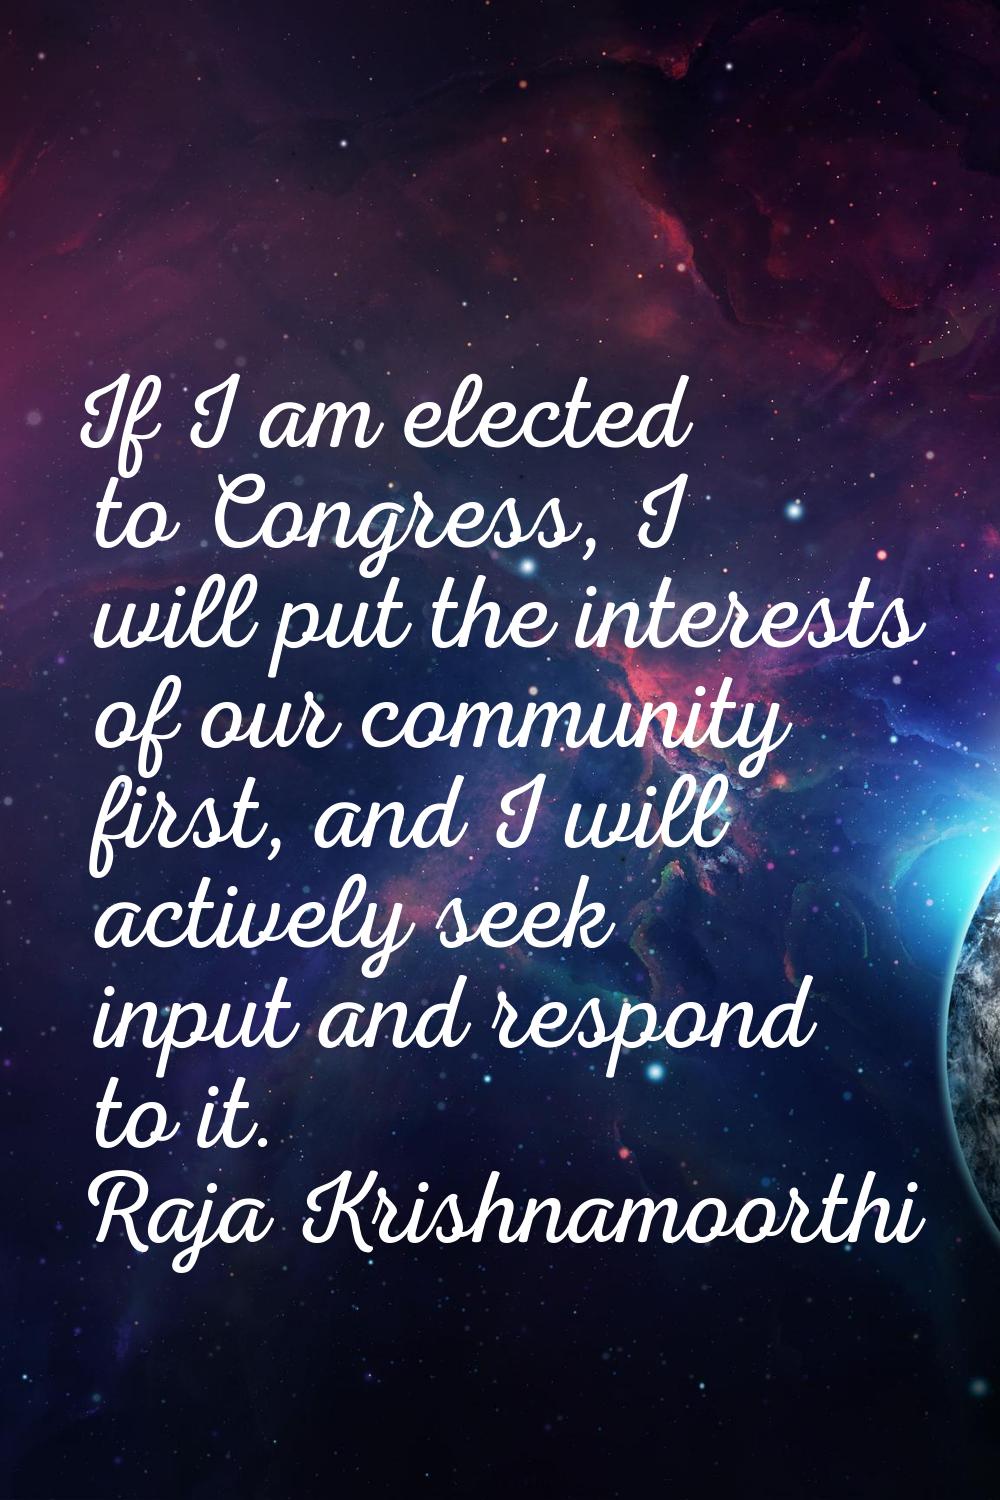 If I am elected to Congress, I will put the interests of our community first, and I will actively s